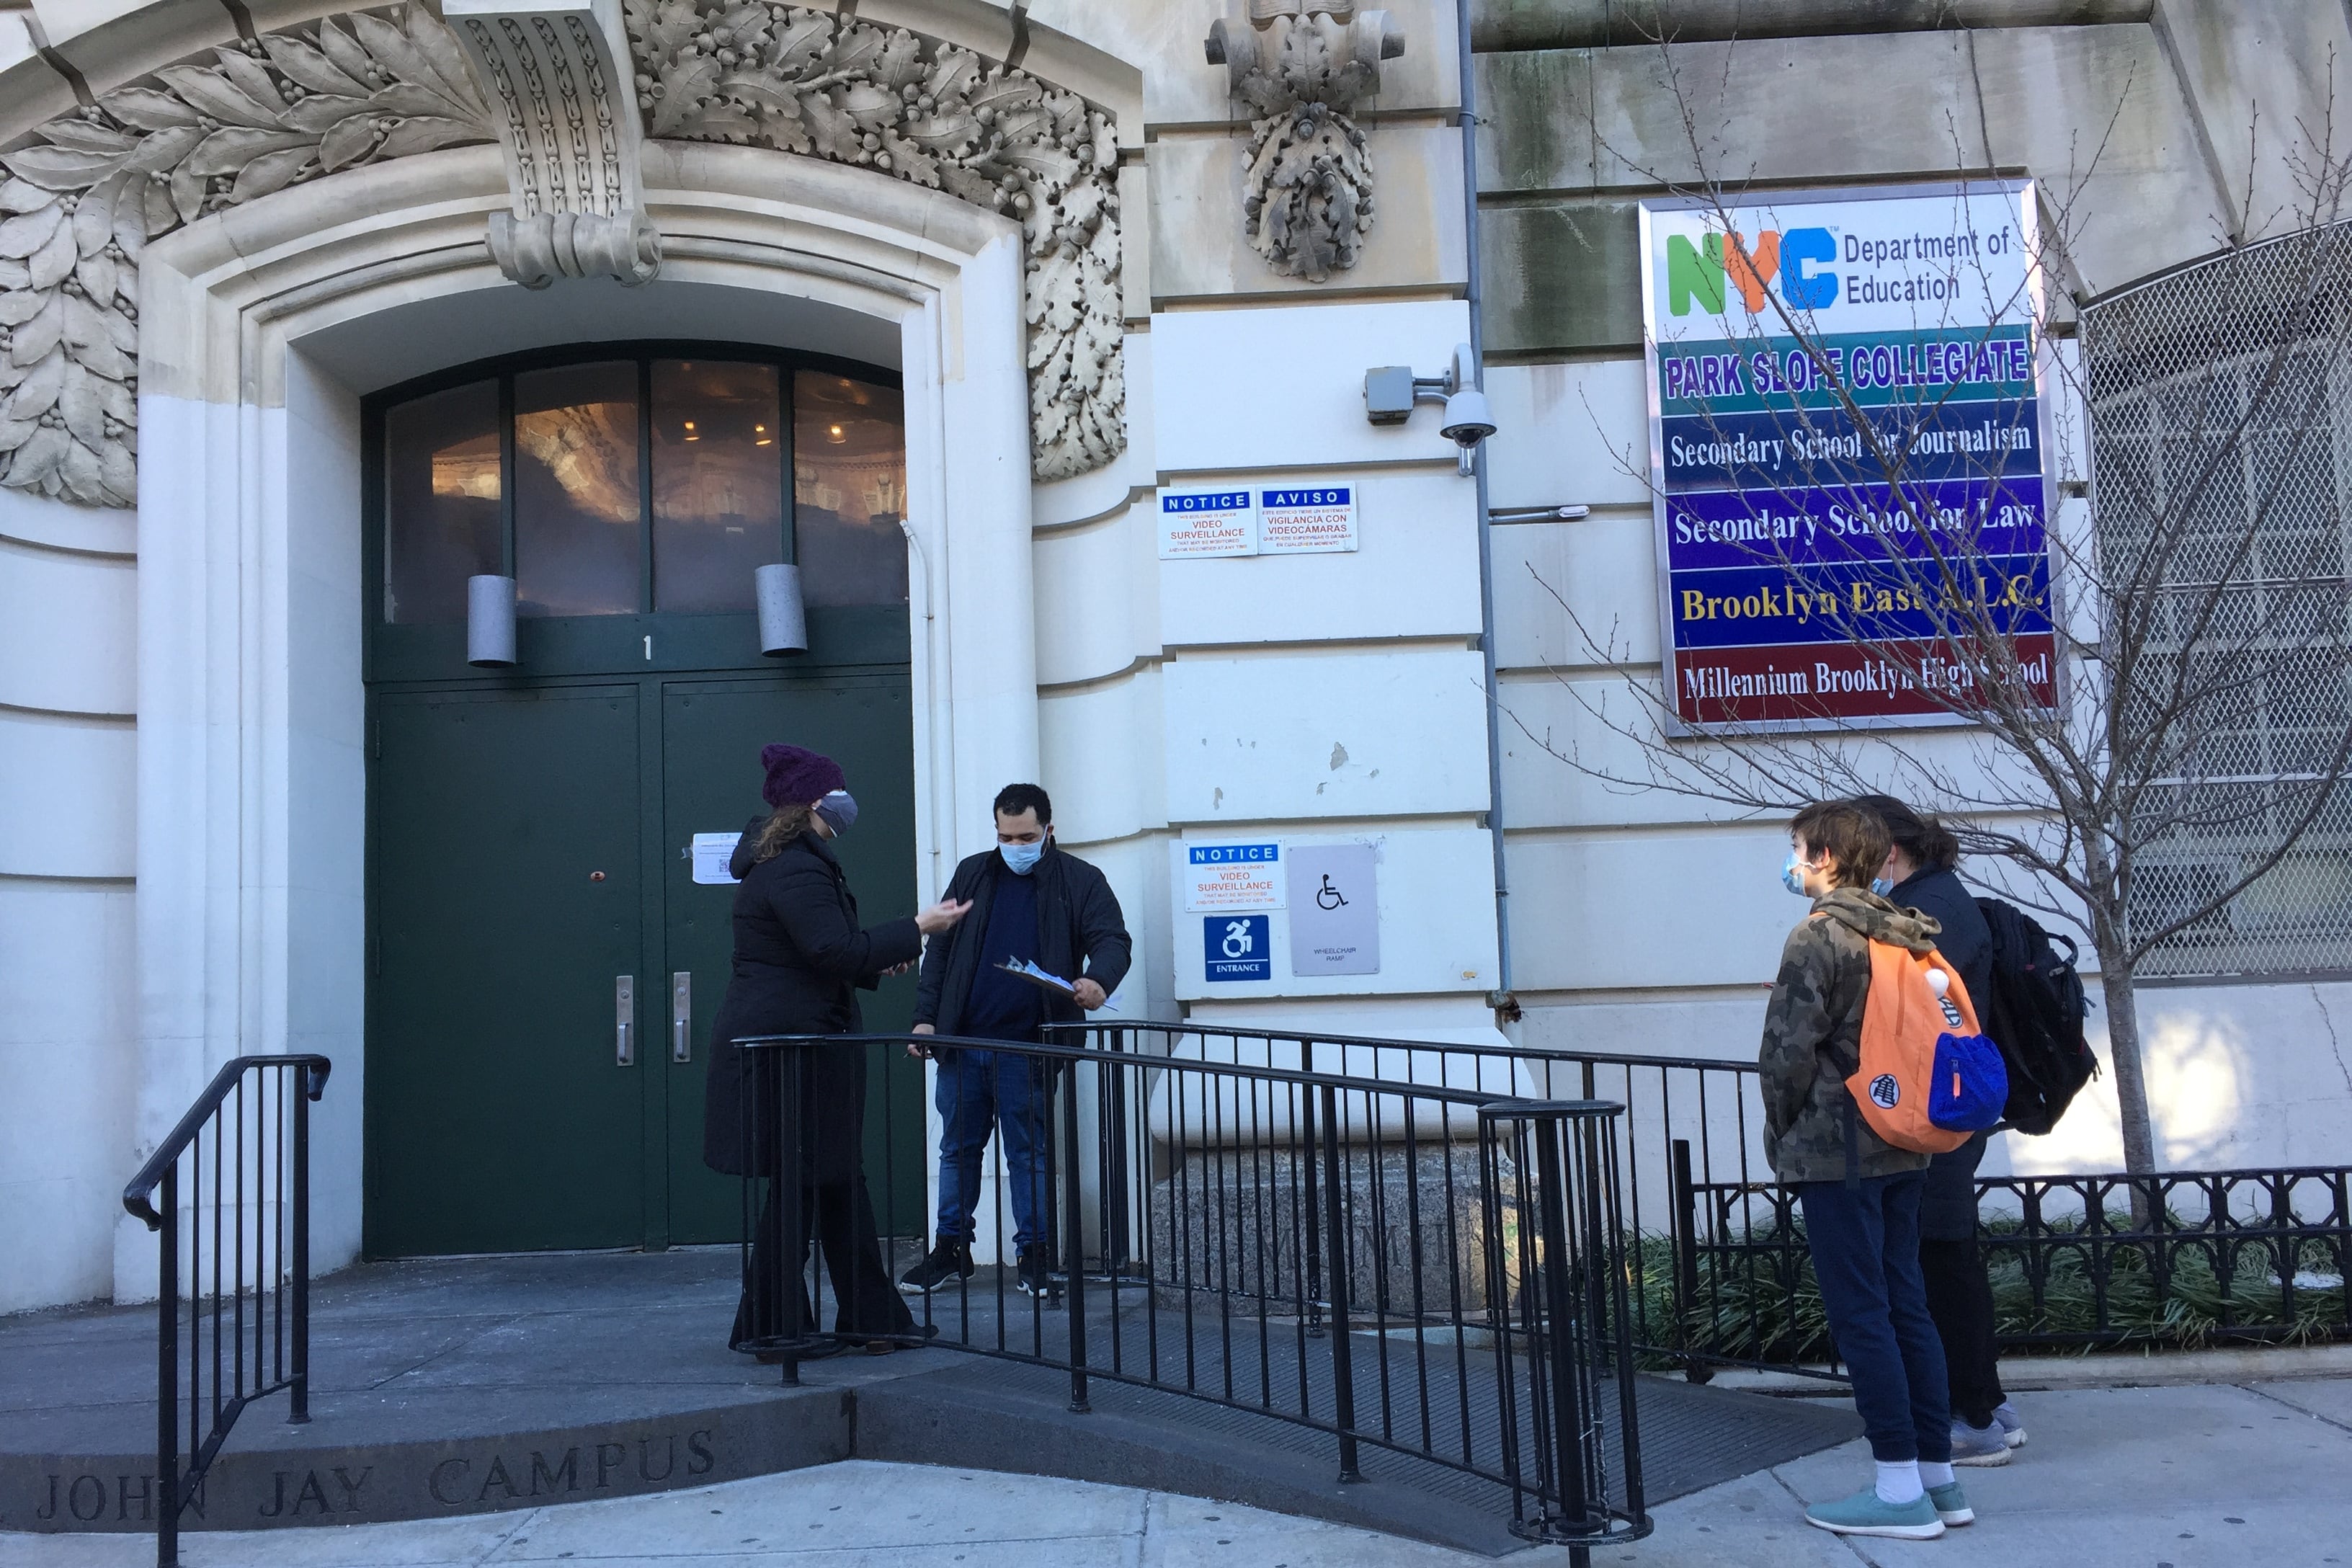 NYC high schools will welcome back students on March 22. Brooklyn’s Park Slope Collegiate, which shares a building with several high schools, welcomed its middle schoolers back on Feb. 25.